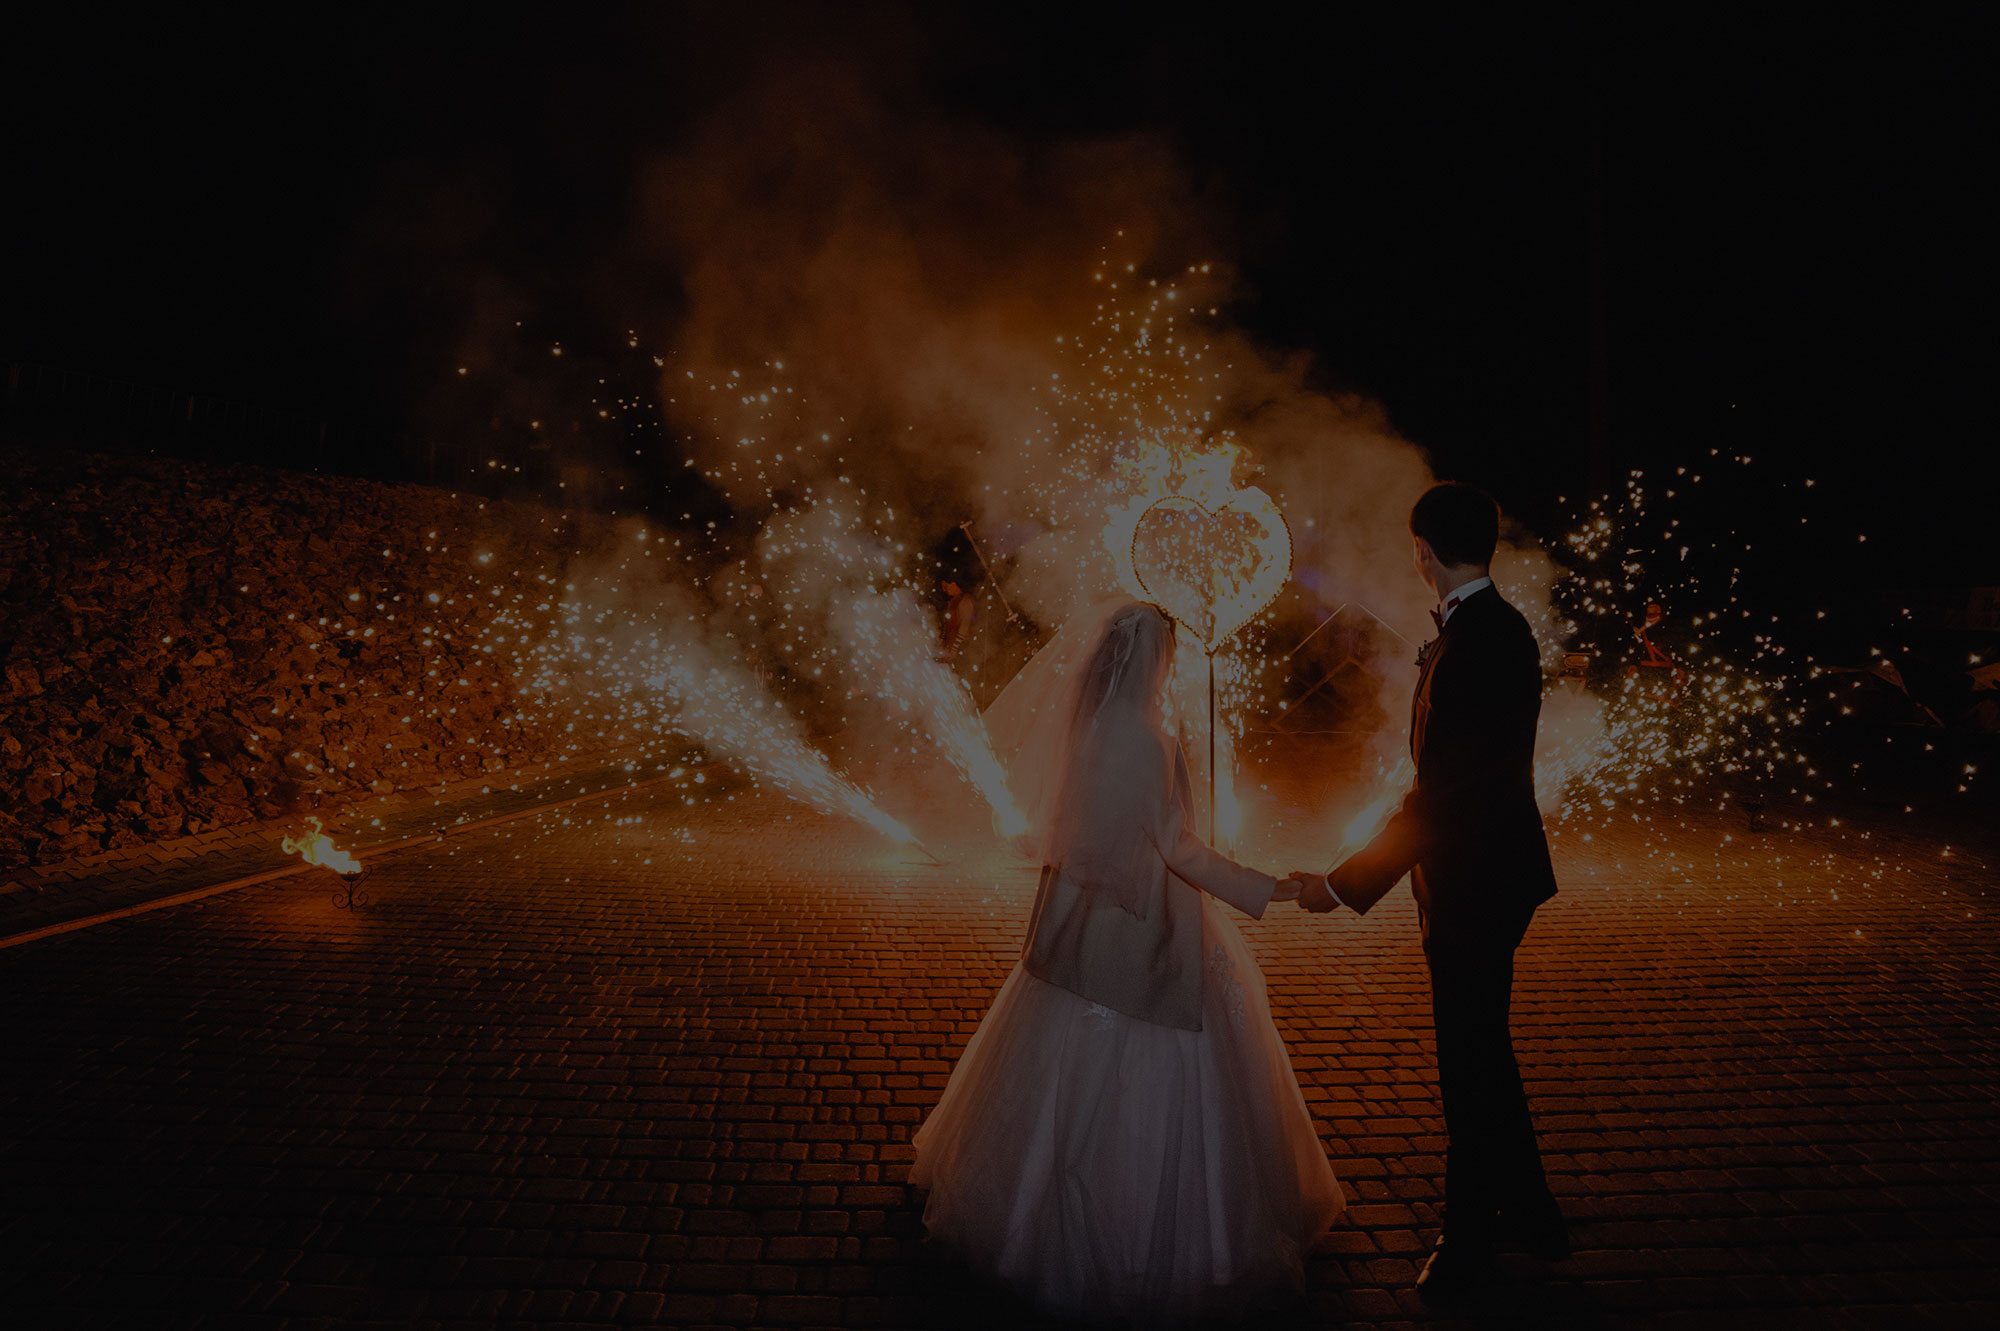 Building a Trigger and Responder Wedding Photograph App for Our UAE-Based Client